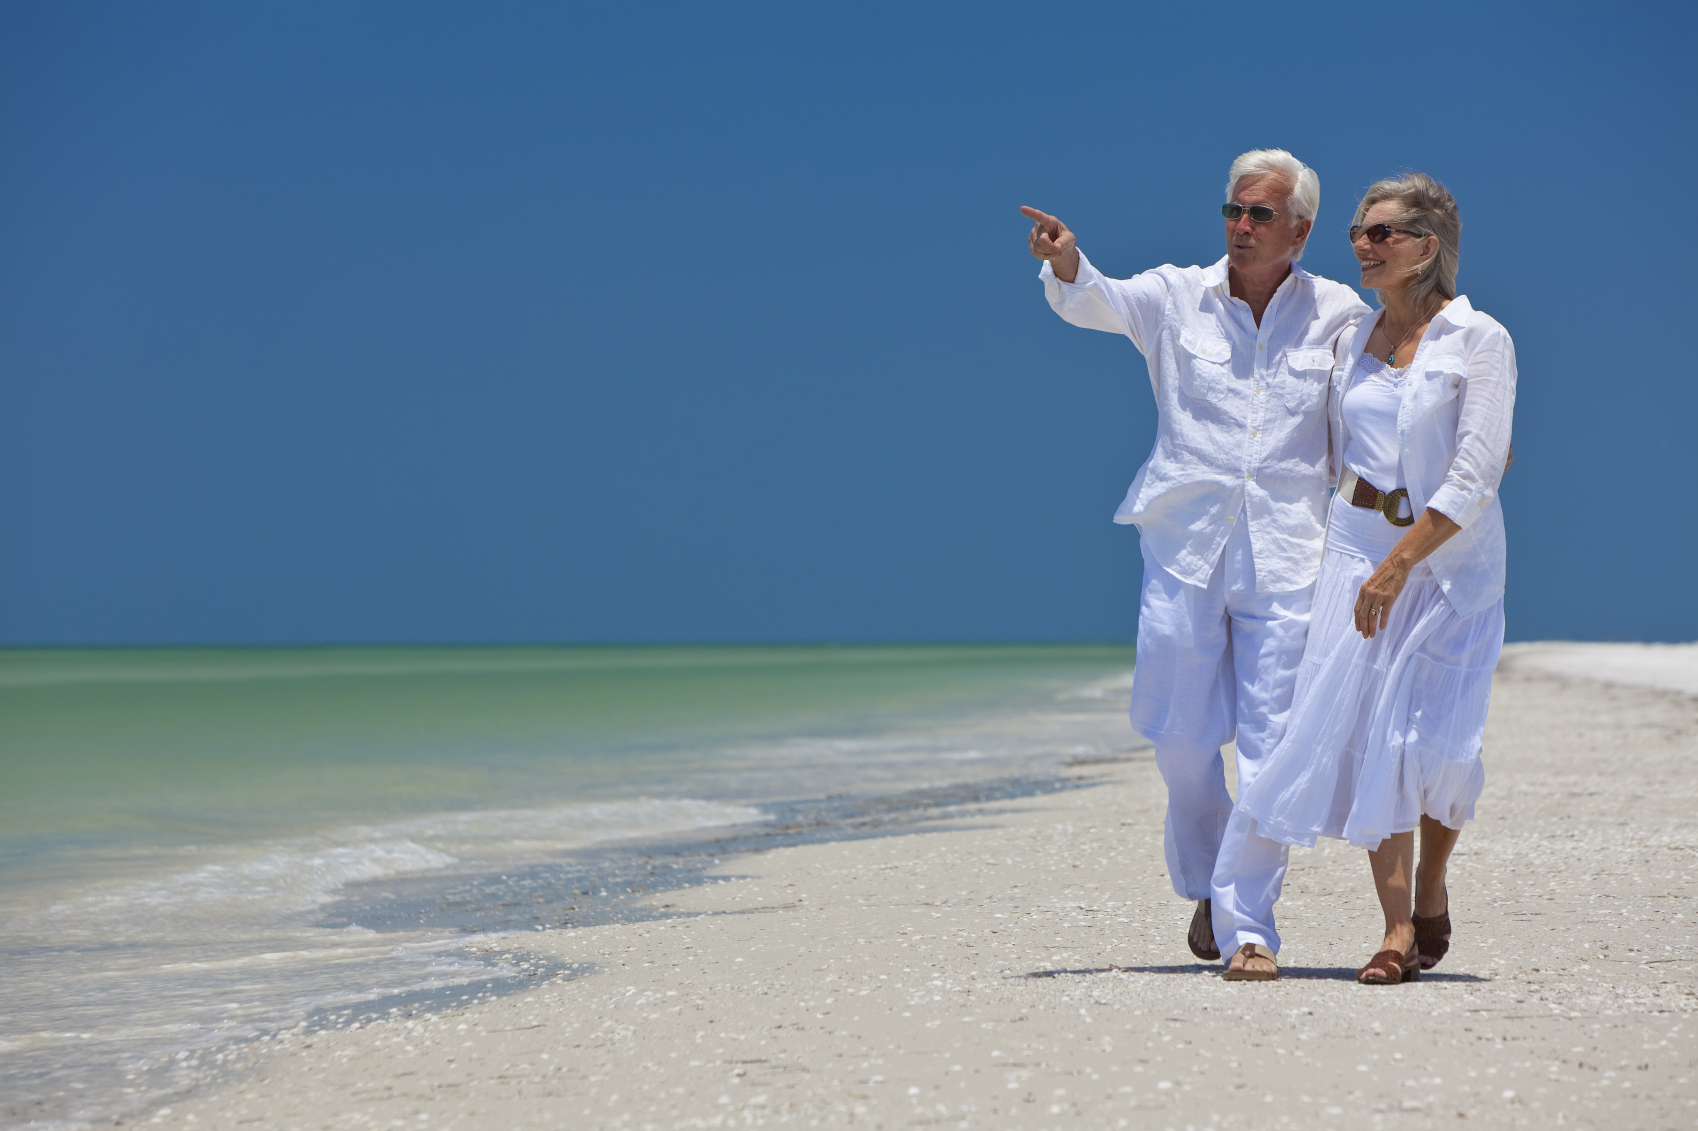 Happy senior man and woman couple walking together looking out to sea on a deserted tropical beach with bright clear blue sky, the man is pointing to the horizon